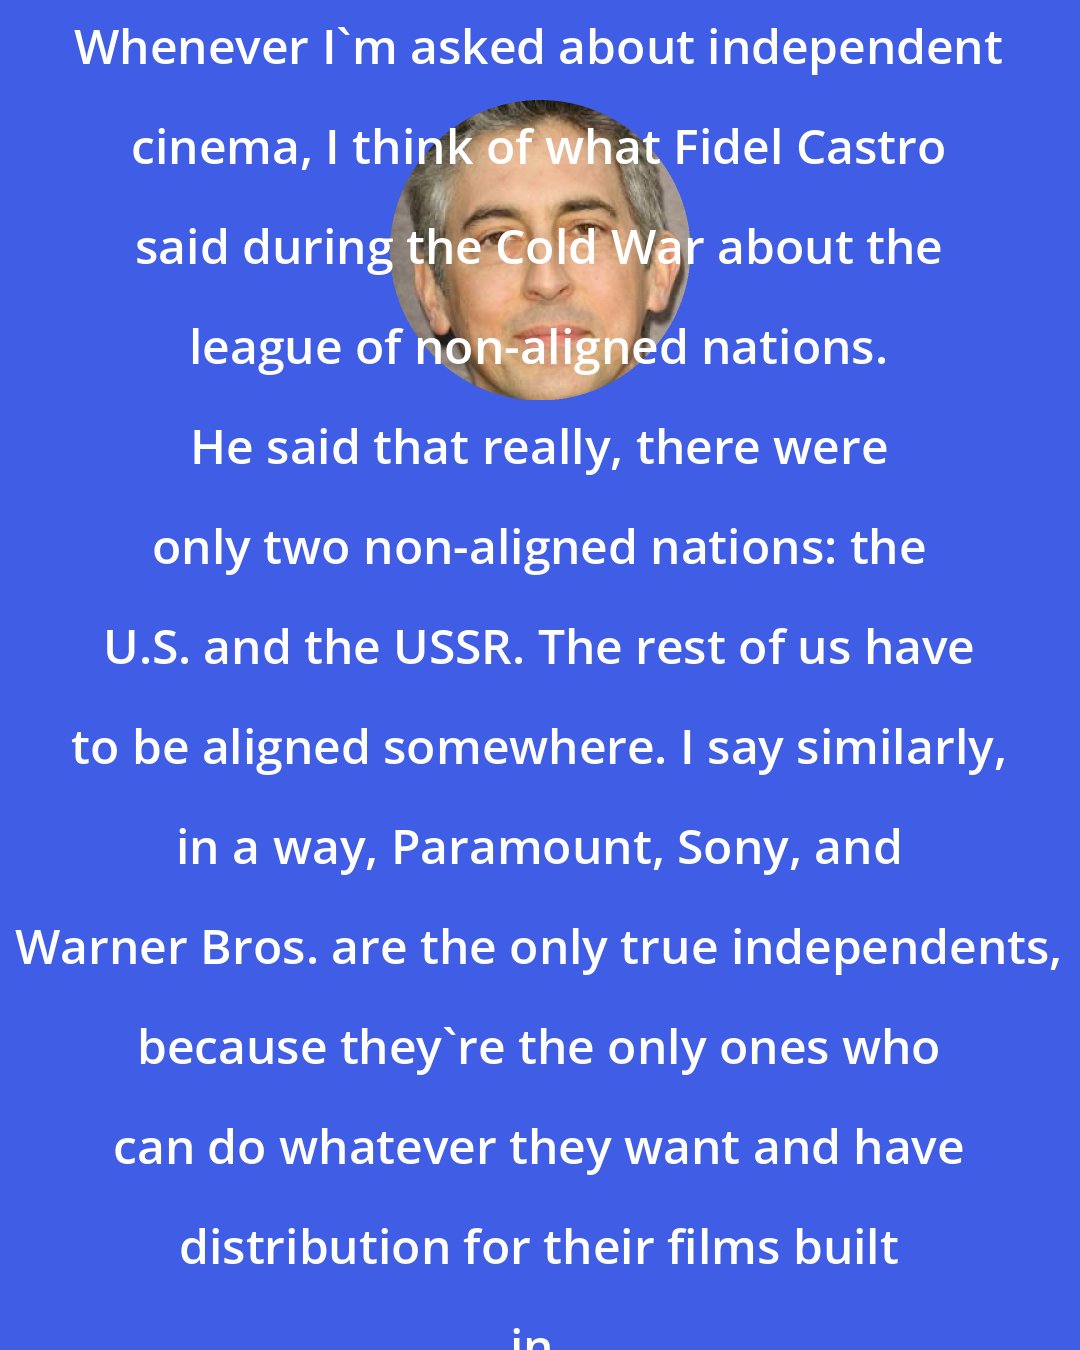 Alexander Payne: Whenever I'm asked about independent cinema, I think of what Fidel Castro said during the Cold War about the league of non-aligned nations. He said that really, there were only two non-aligned nations: the U.S. and the USSR. The rest of us have to be aligned somewhere. I say similarly, in a way, Paramount, Sony, and Warner Bros. are the only true independents, because they're the only ones who can do whatever they want and have distribution for their films built in.